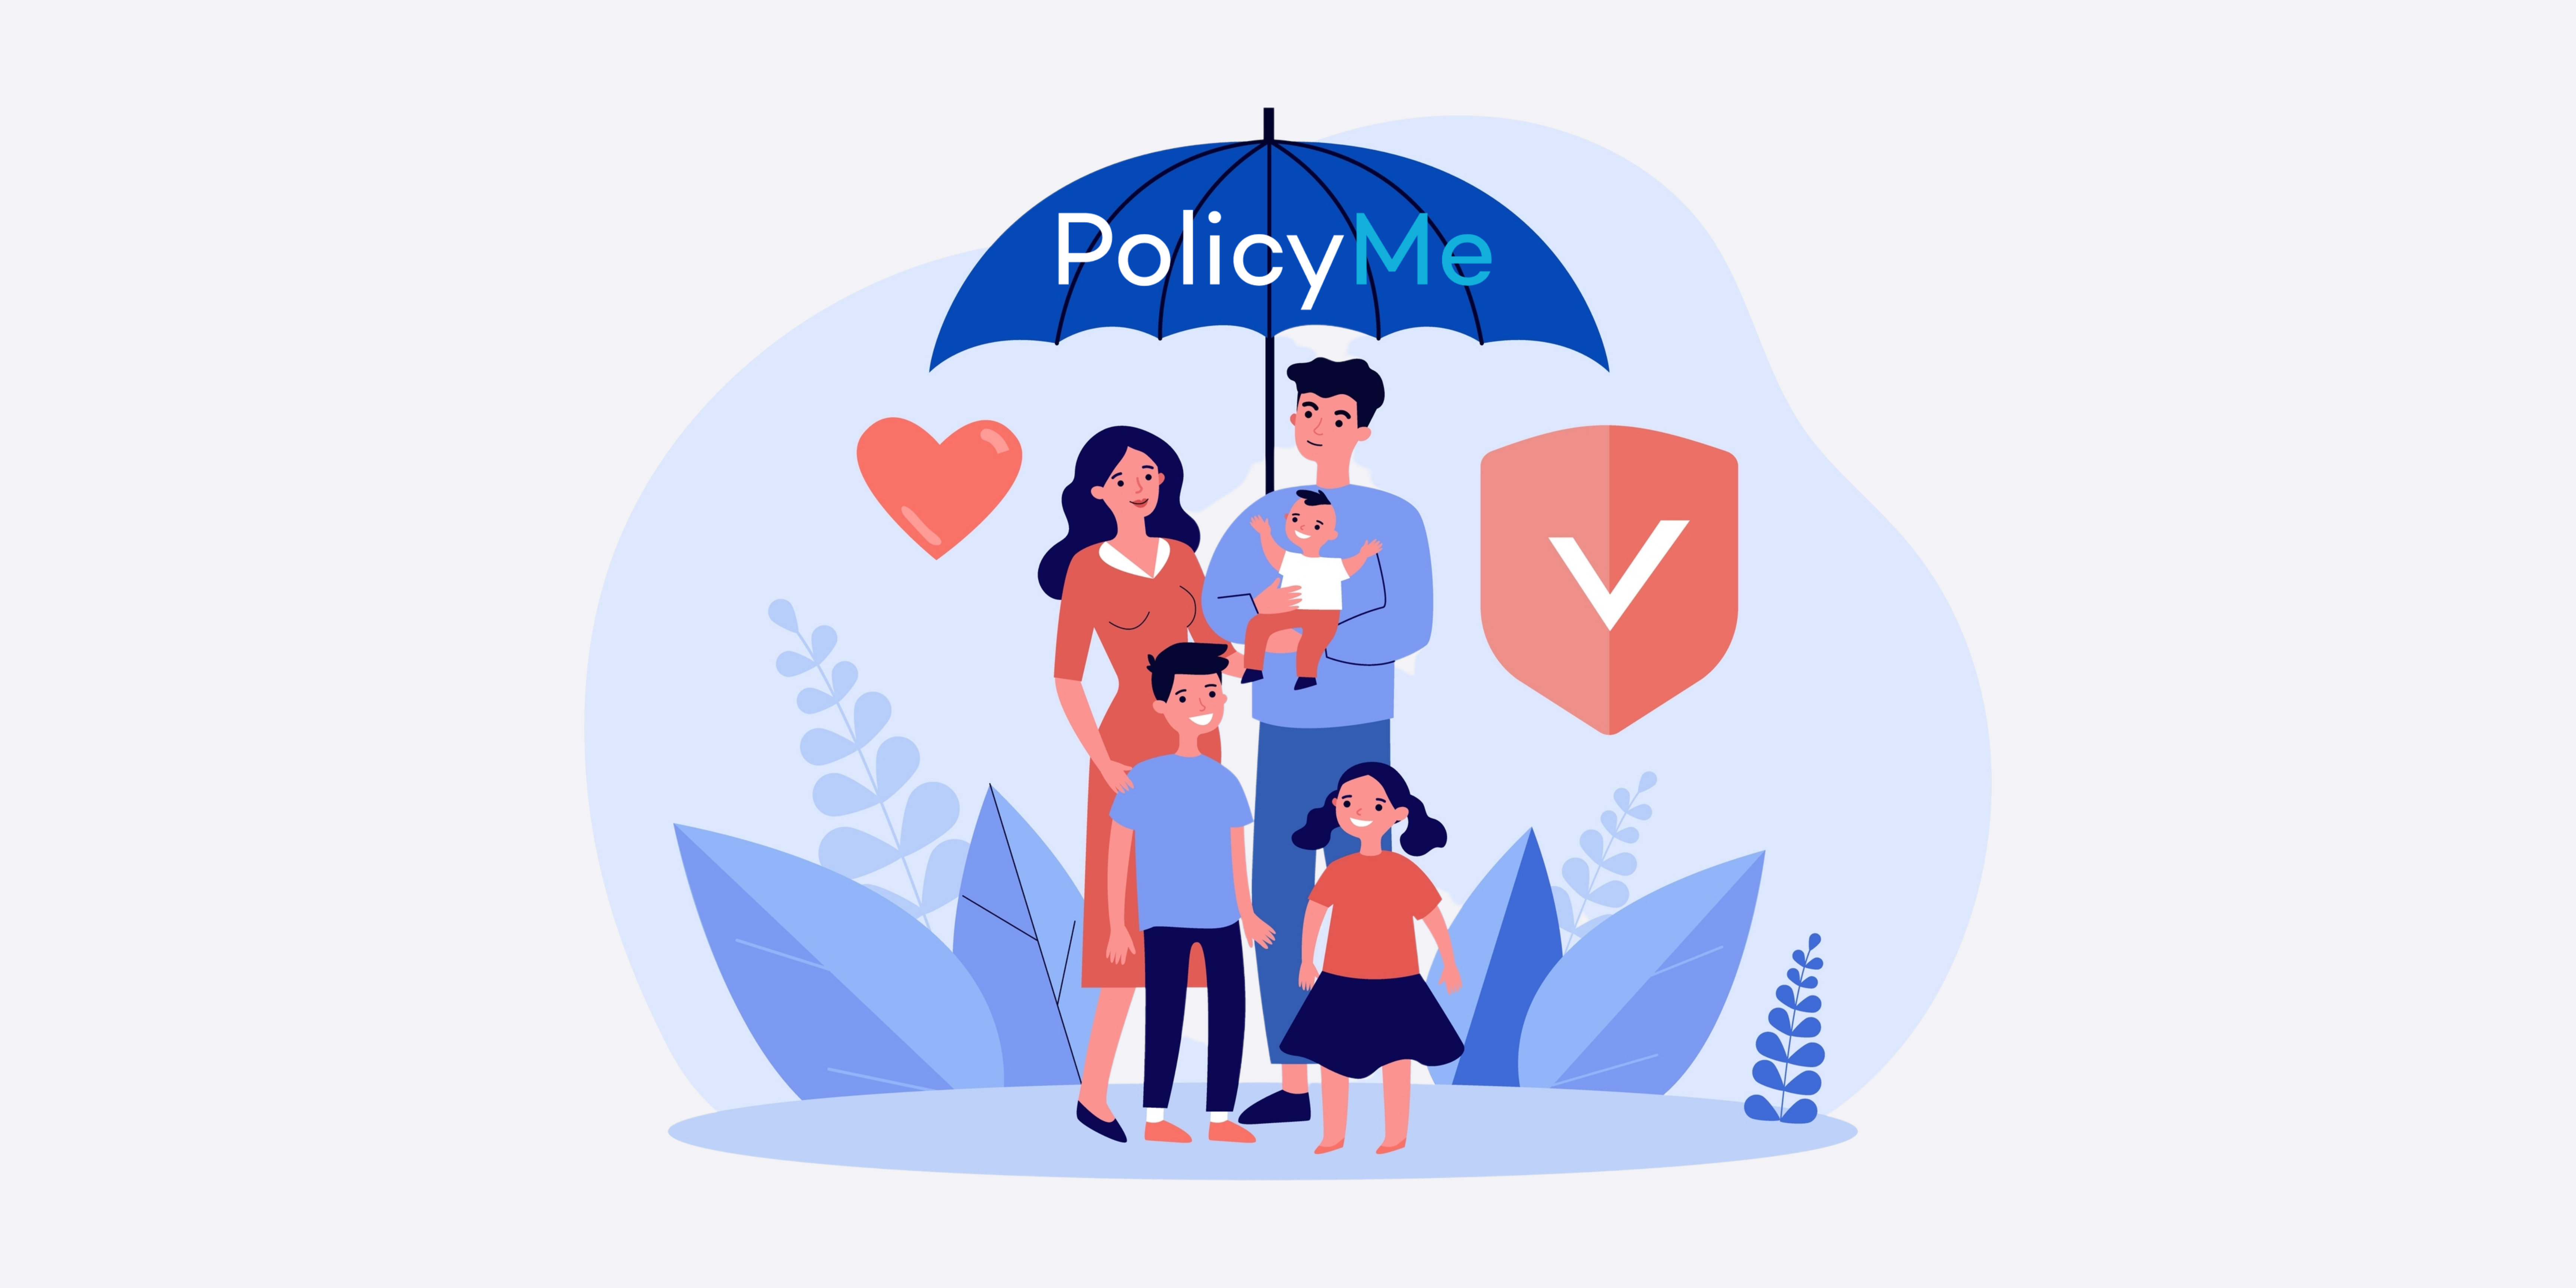 Do I Need Life Insurance? Life Insurance For Canadians Made Simple with PolicyMe